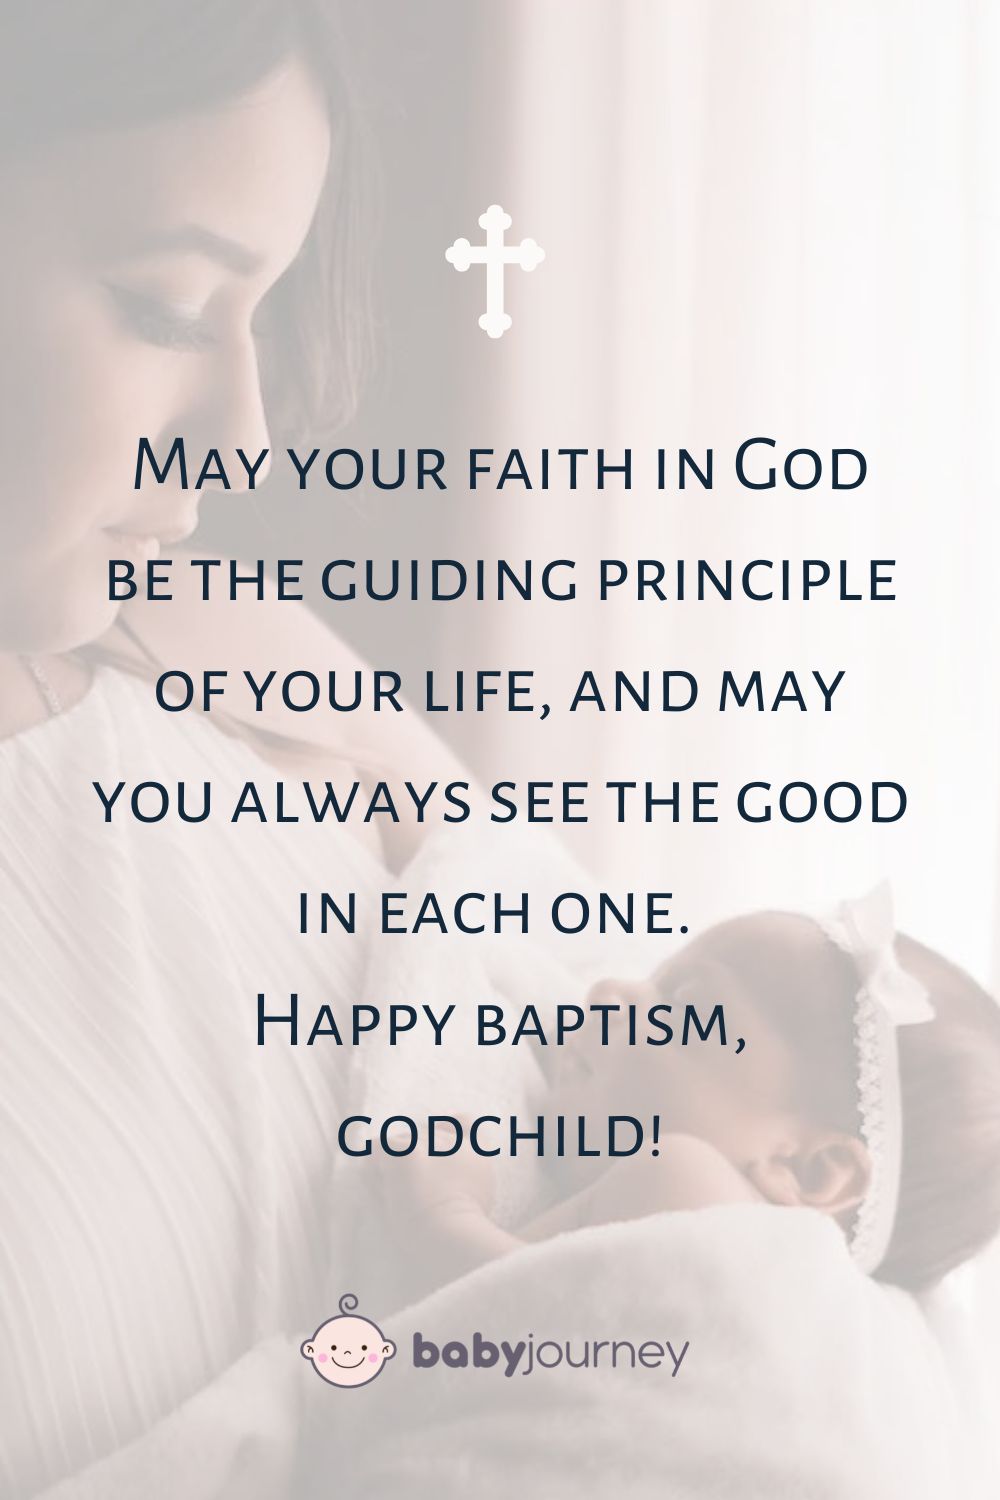 May your faith in God be the guiding principle of your life, and may you always see the good in each one. Happy baptism, godchild! - godparents quotes for baptism - Baby Journey